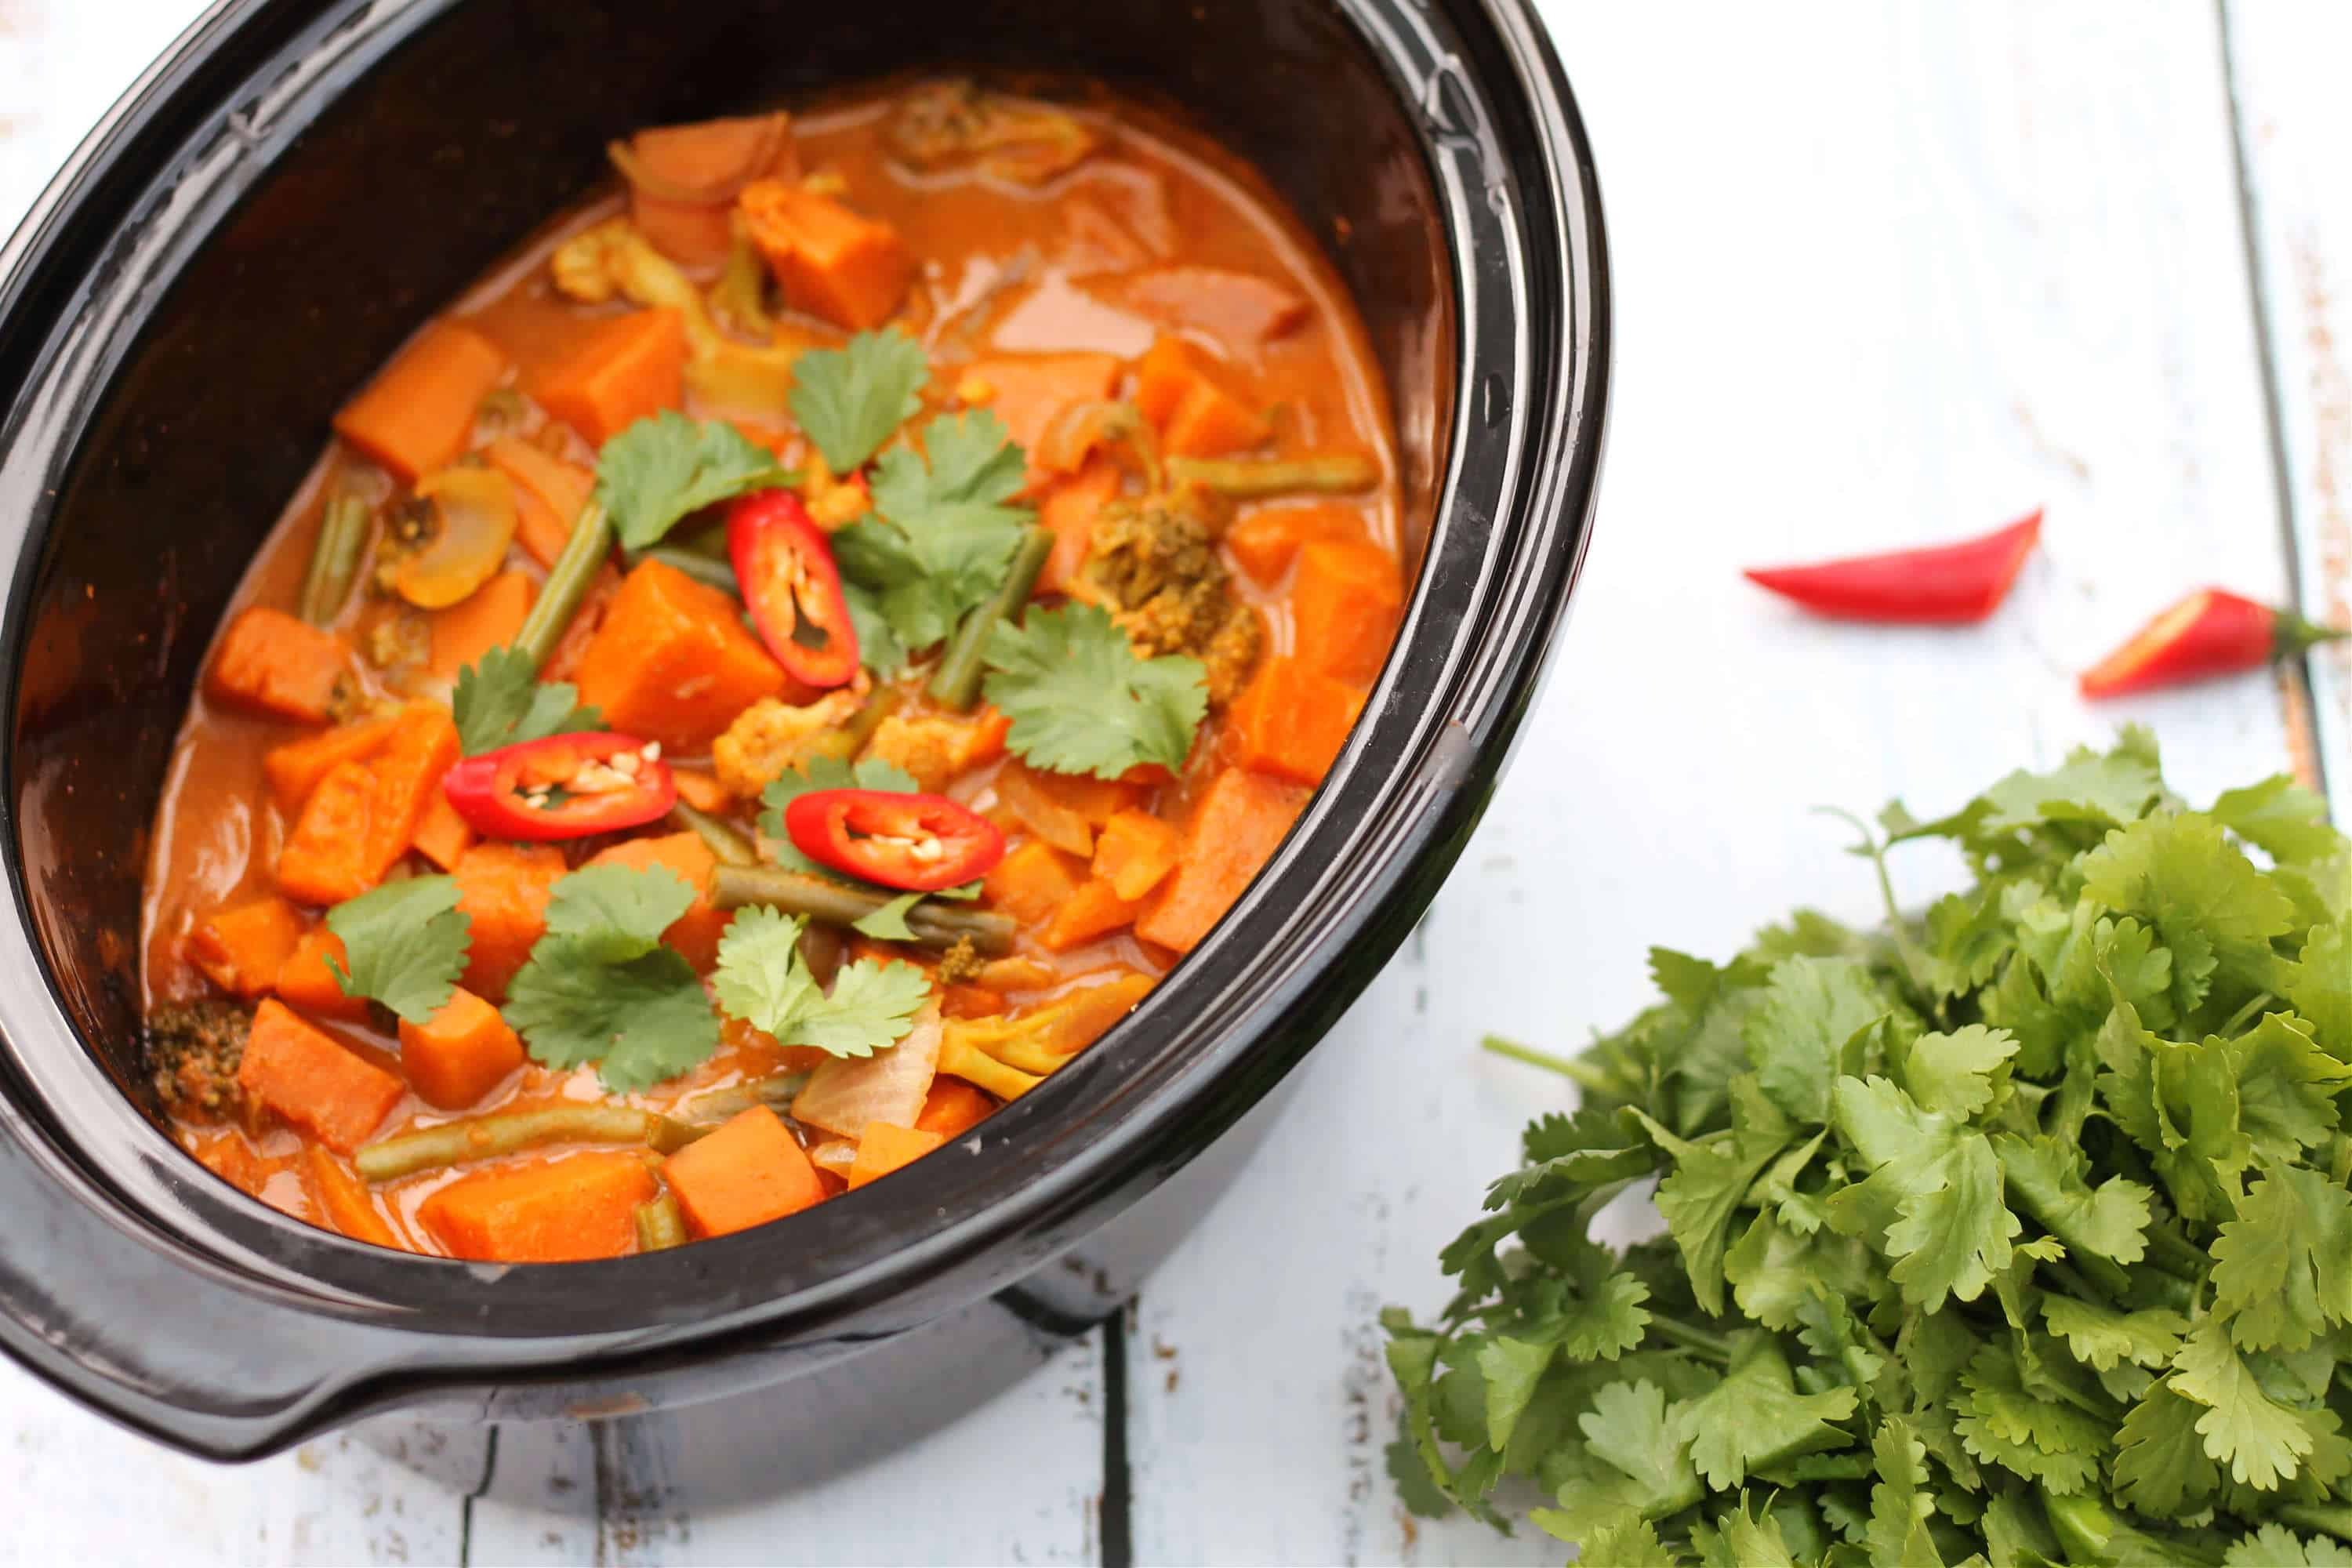 Slow cooker curry topped with sliced red chilli and coriander leaves, ready to serve.